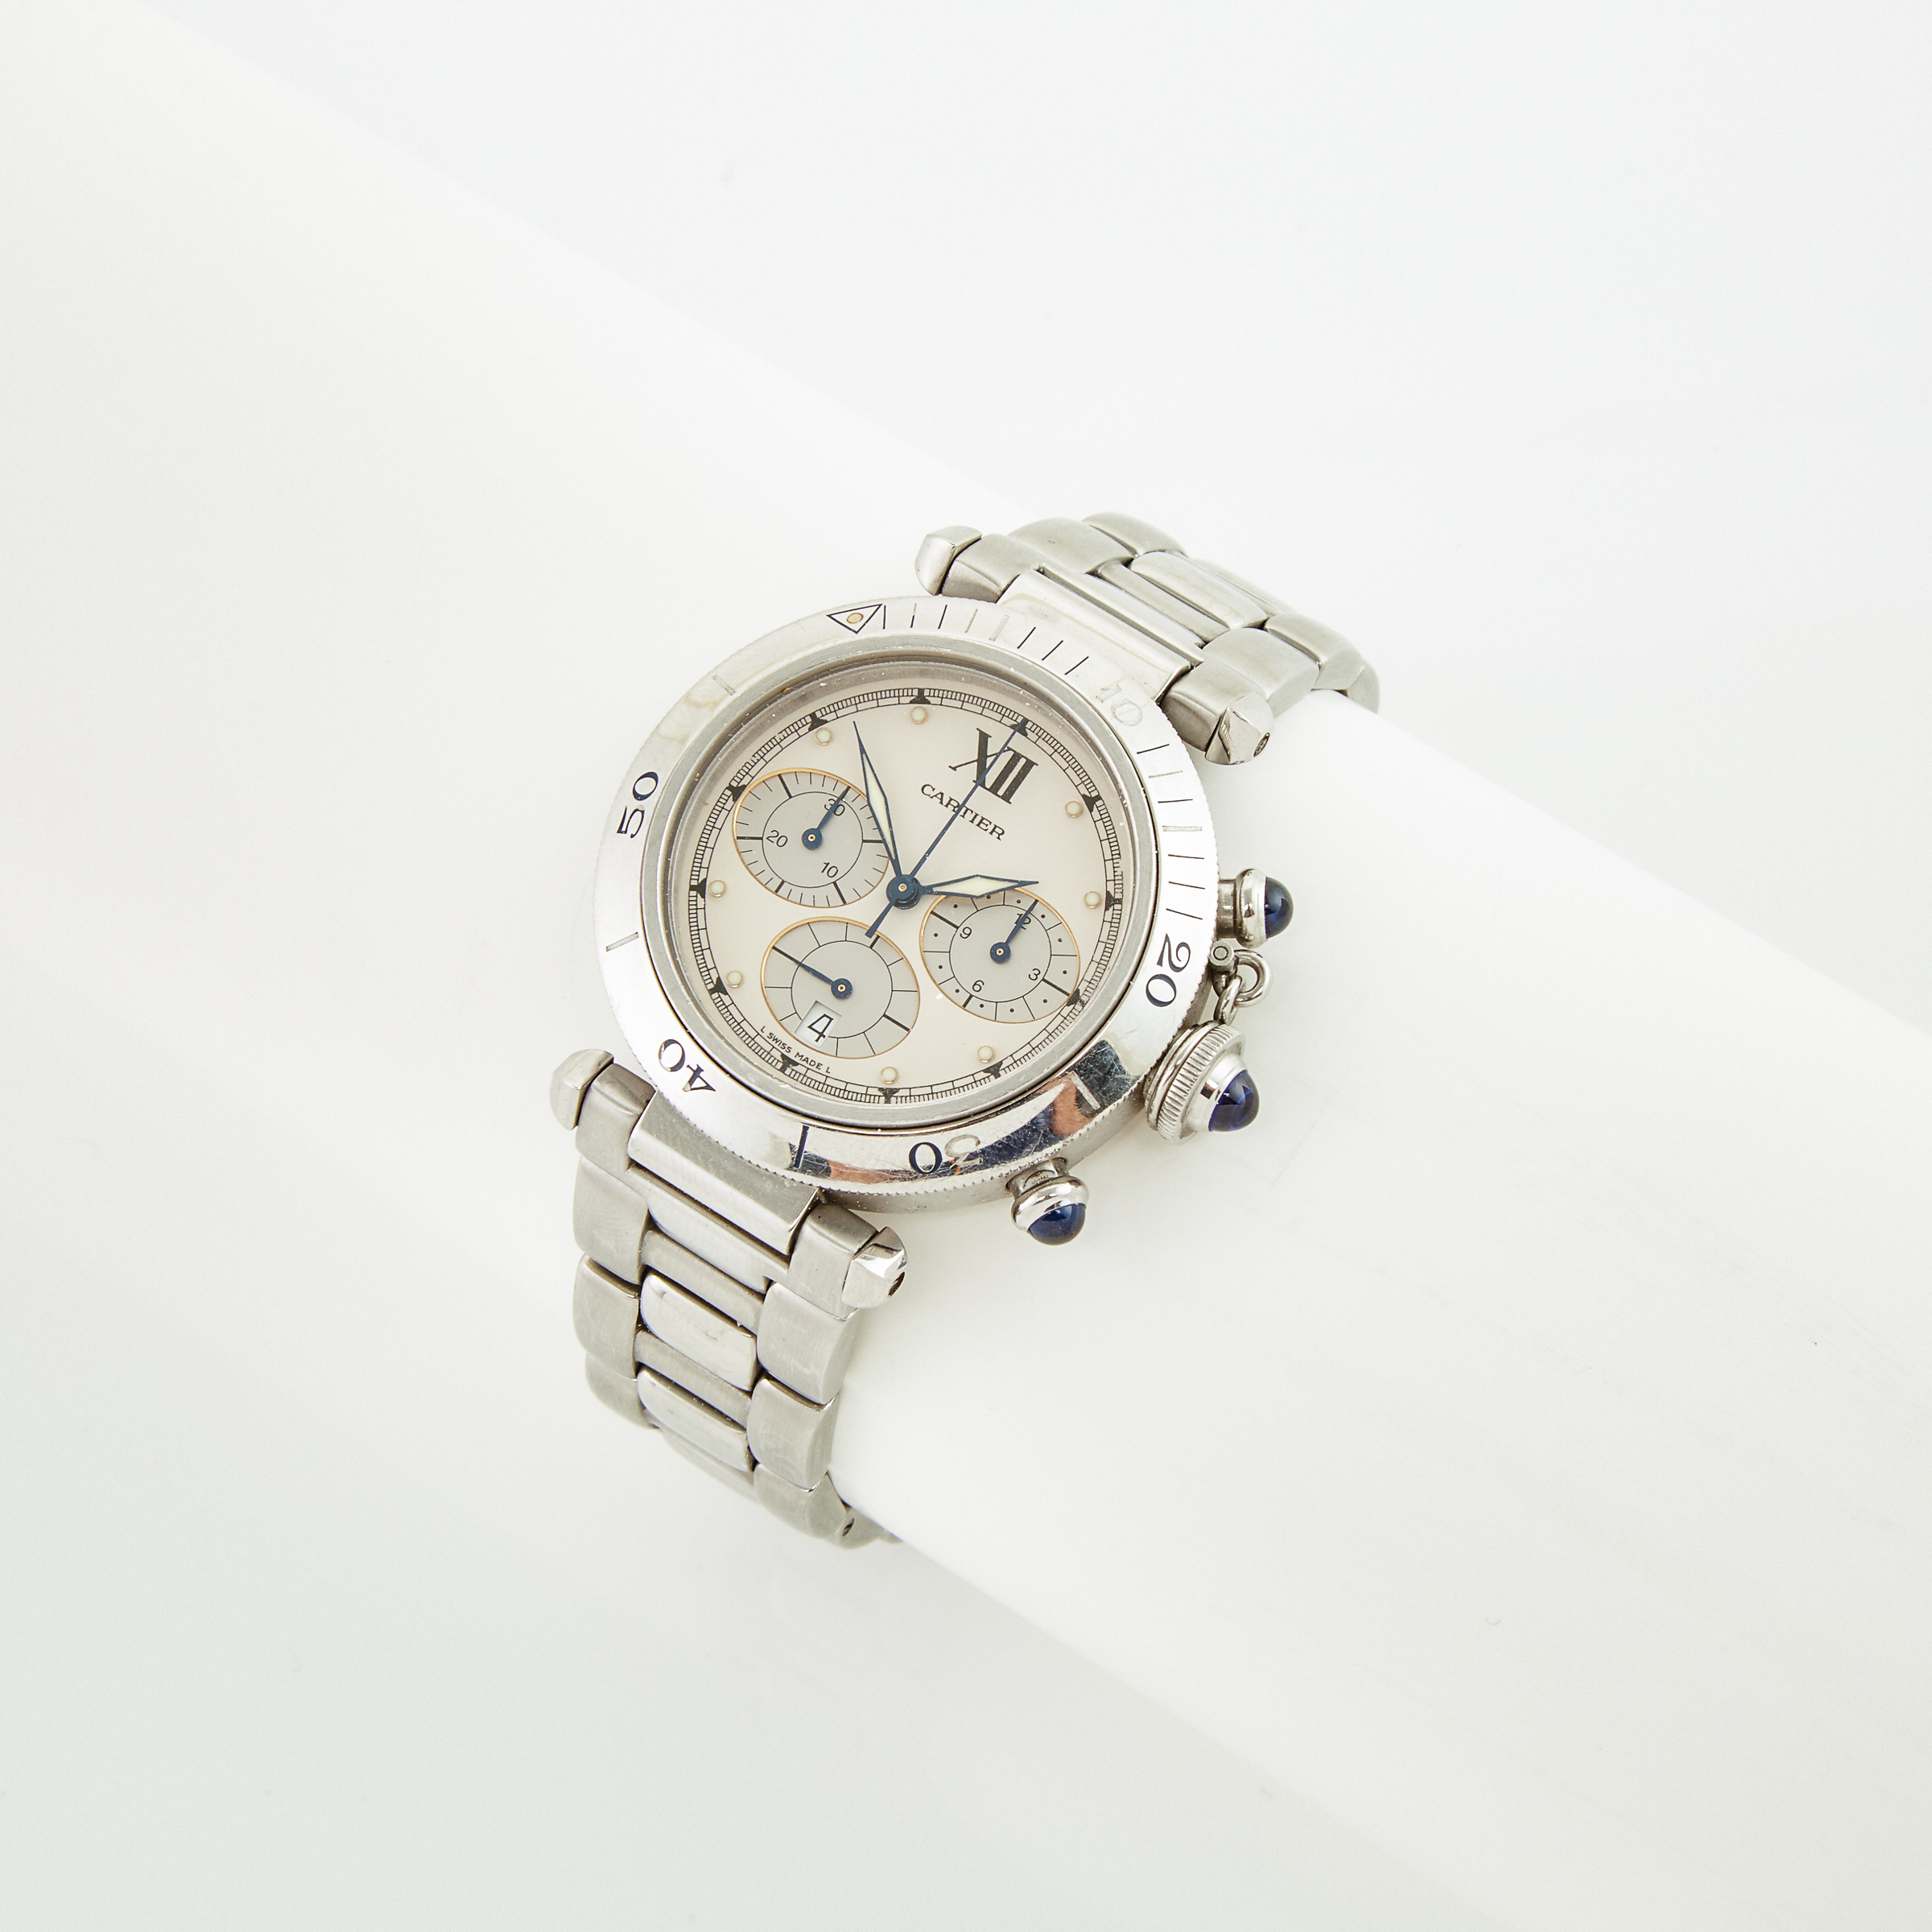 Cartier Pasha Wristwatch with Chronograph and Date